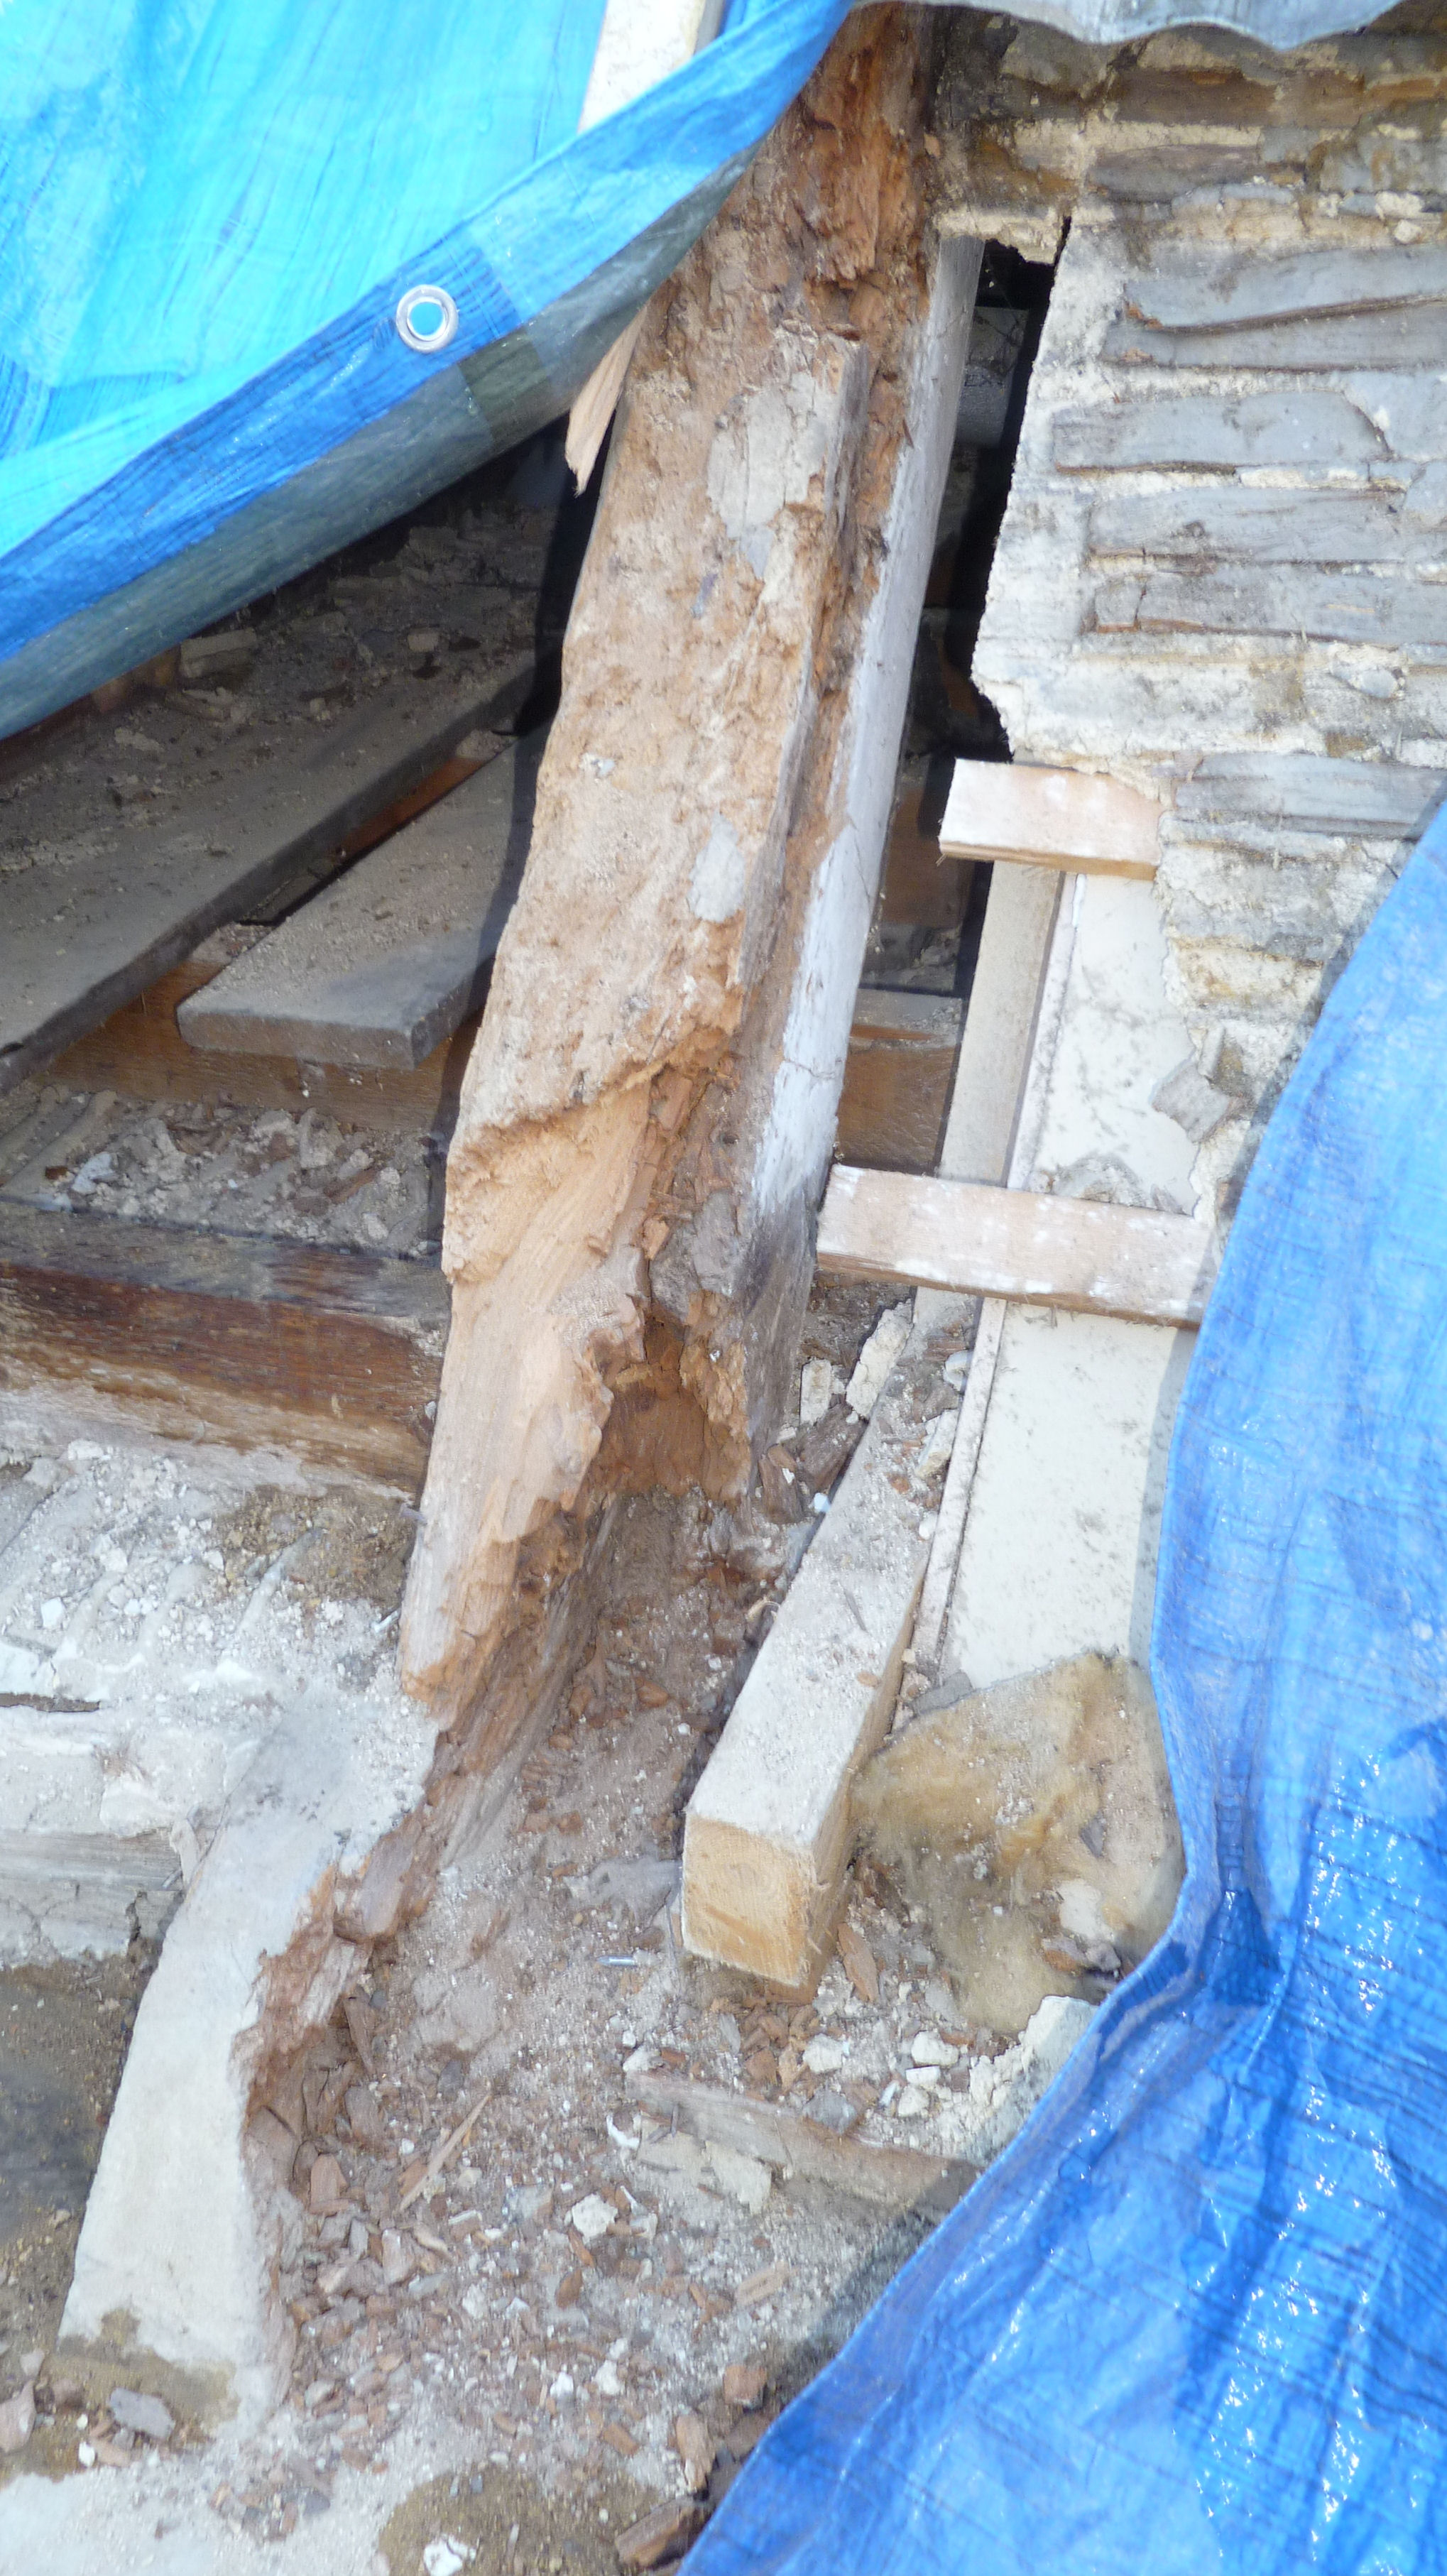 Decayed Truss End Timber in need of repair.